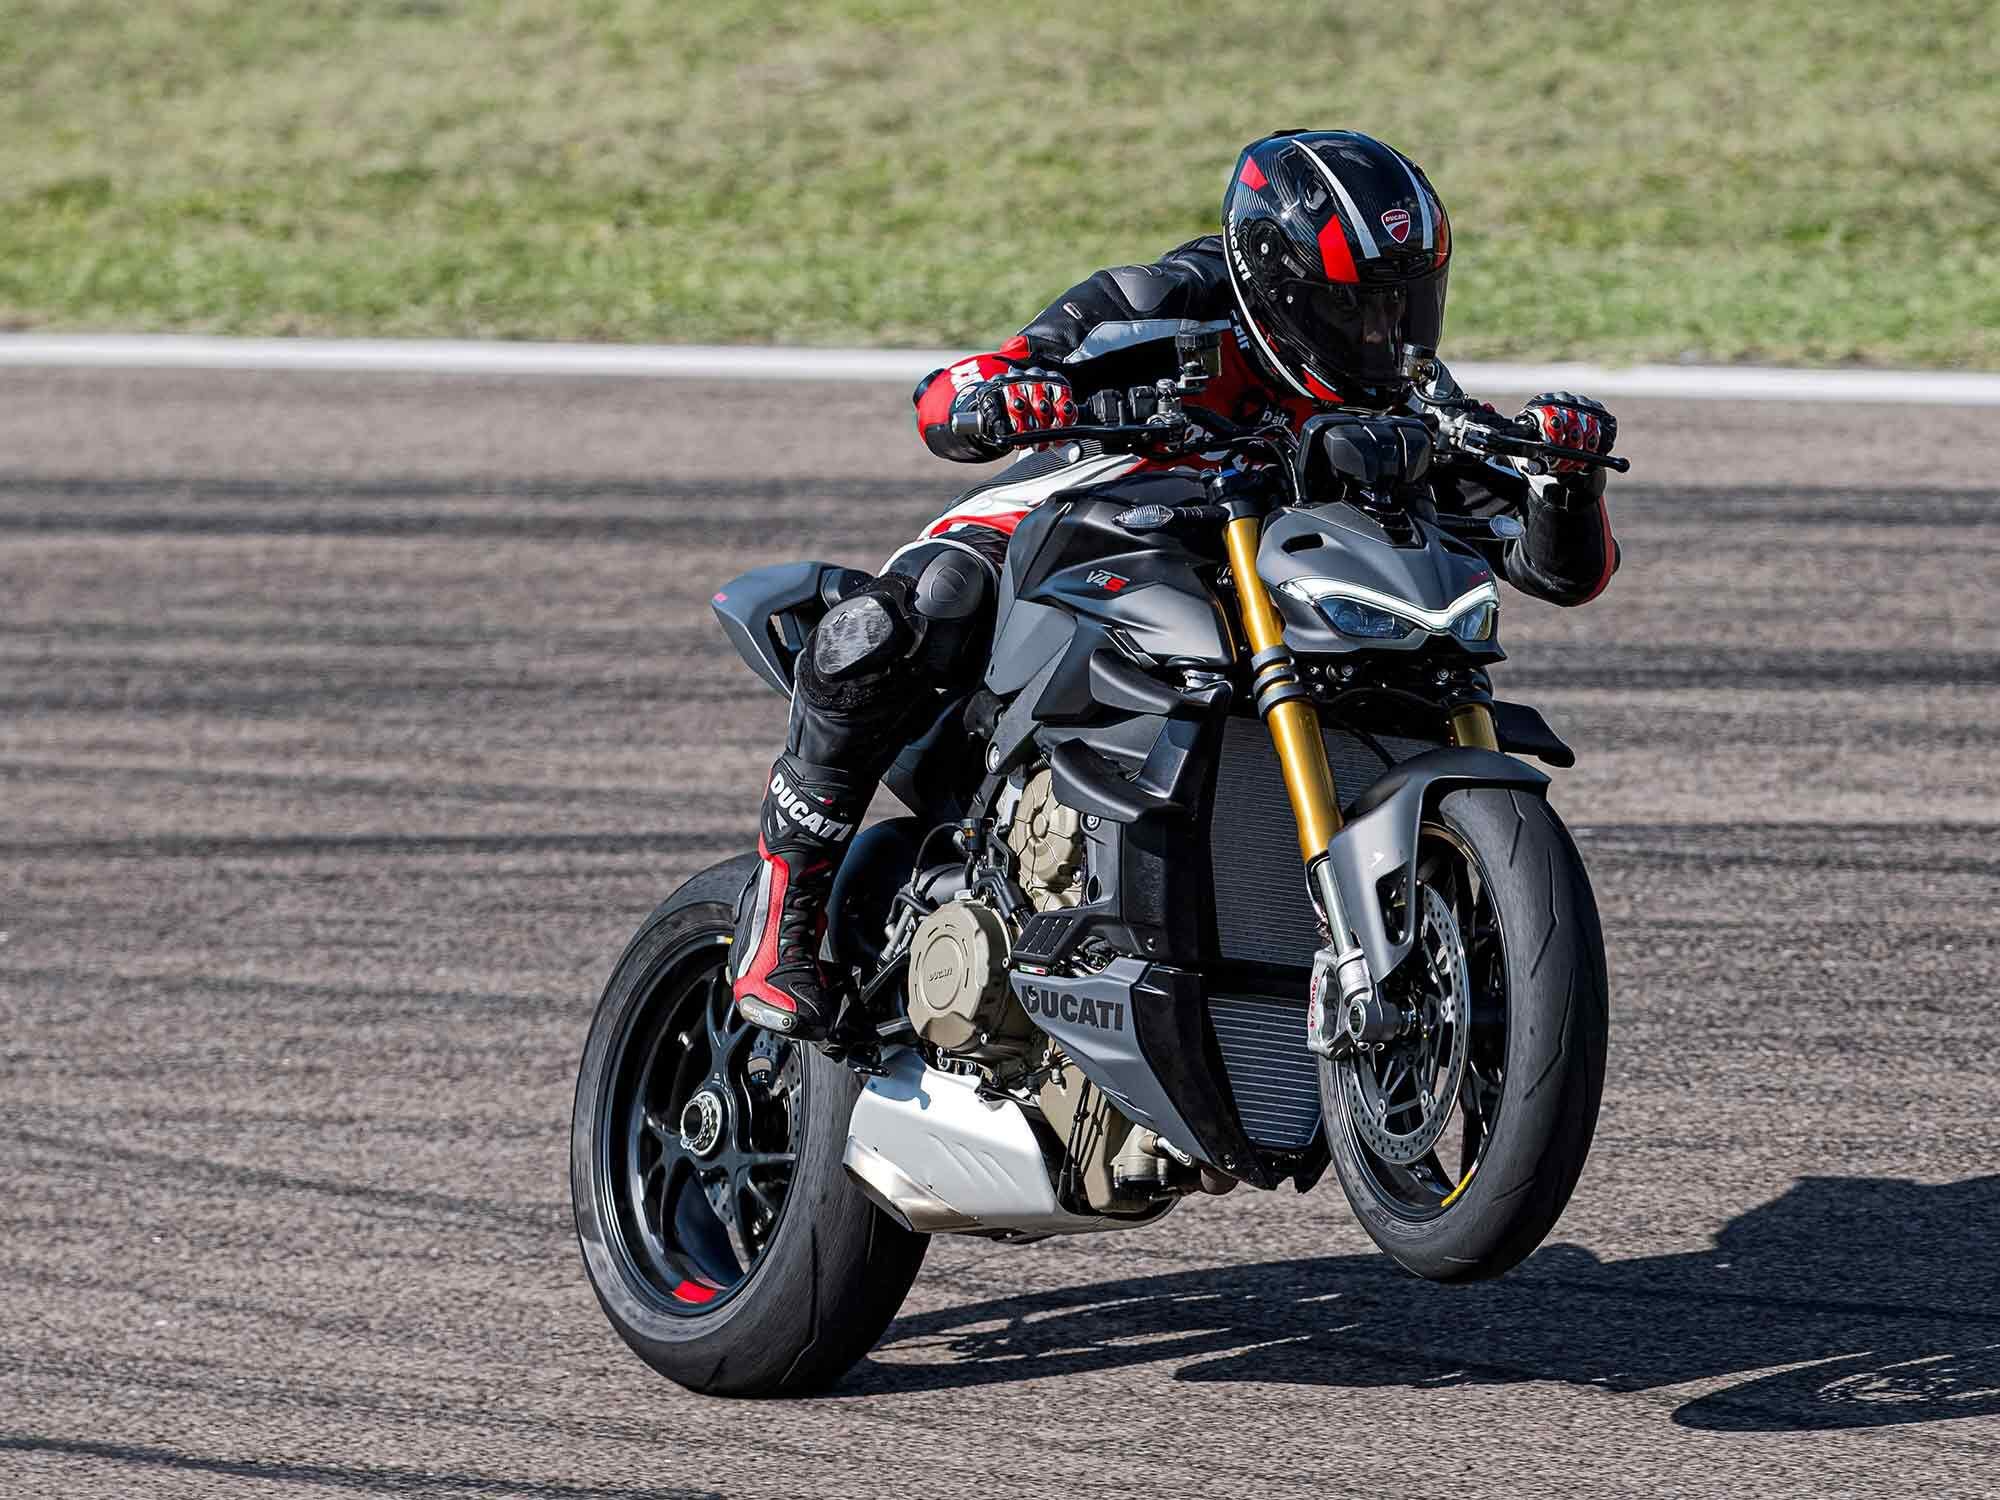 With the help of 208 hp, the Ducati Streetfighter V4 S lifts a little leg.